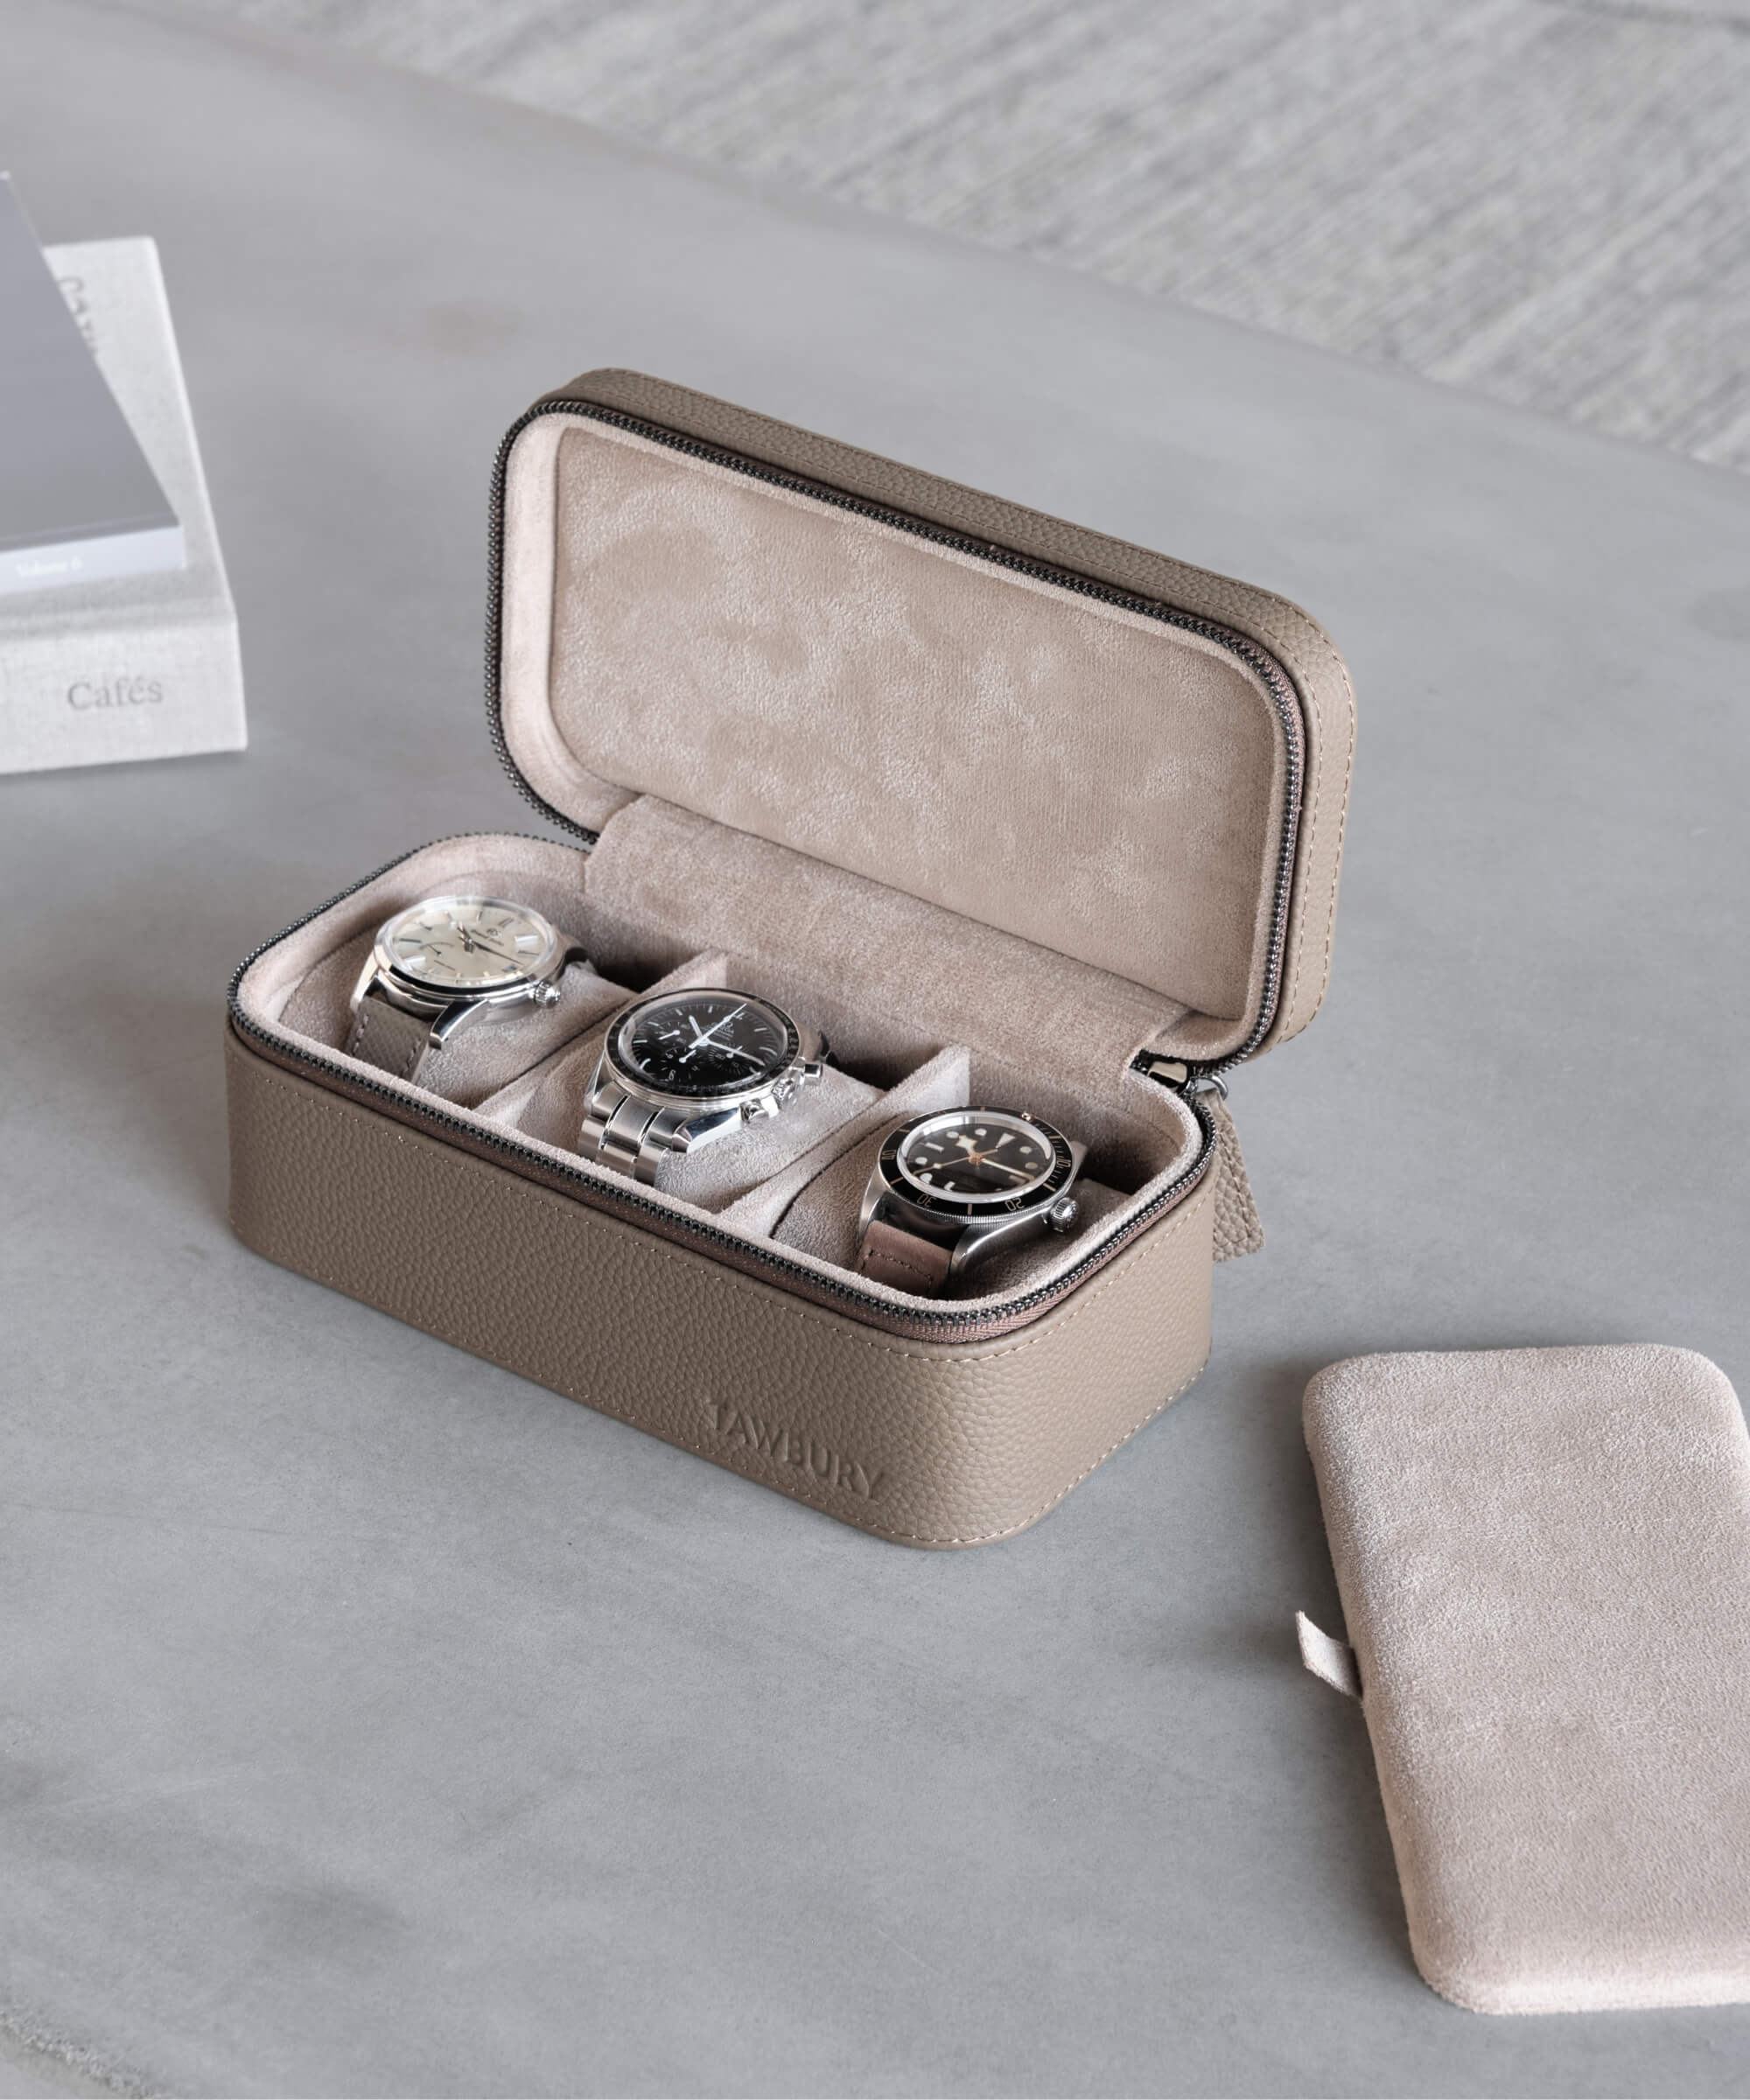 A TAWBURY Fraser 3 Watch Travel Case - Taupe with four watches in it.